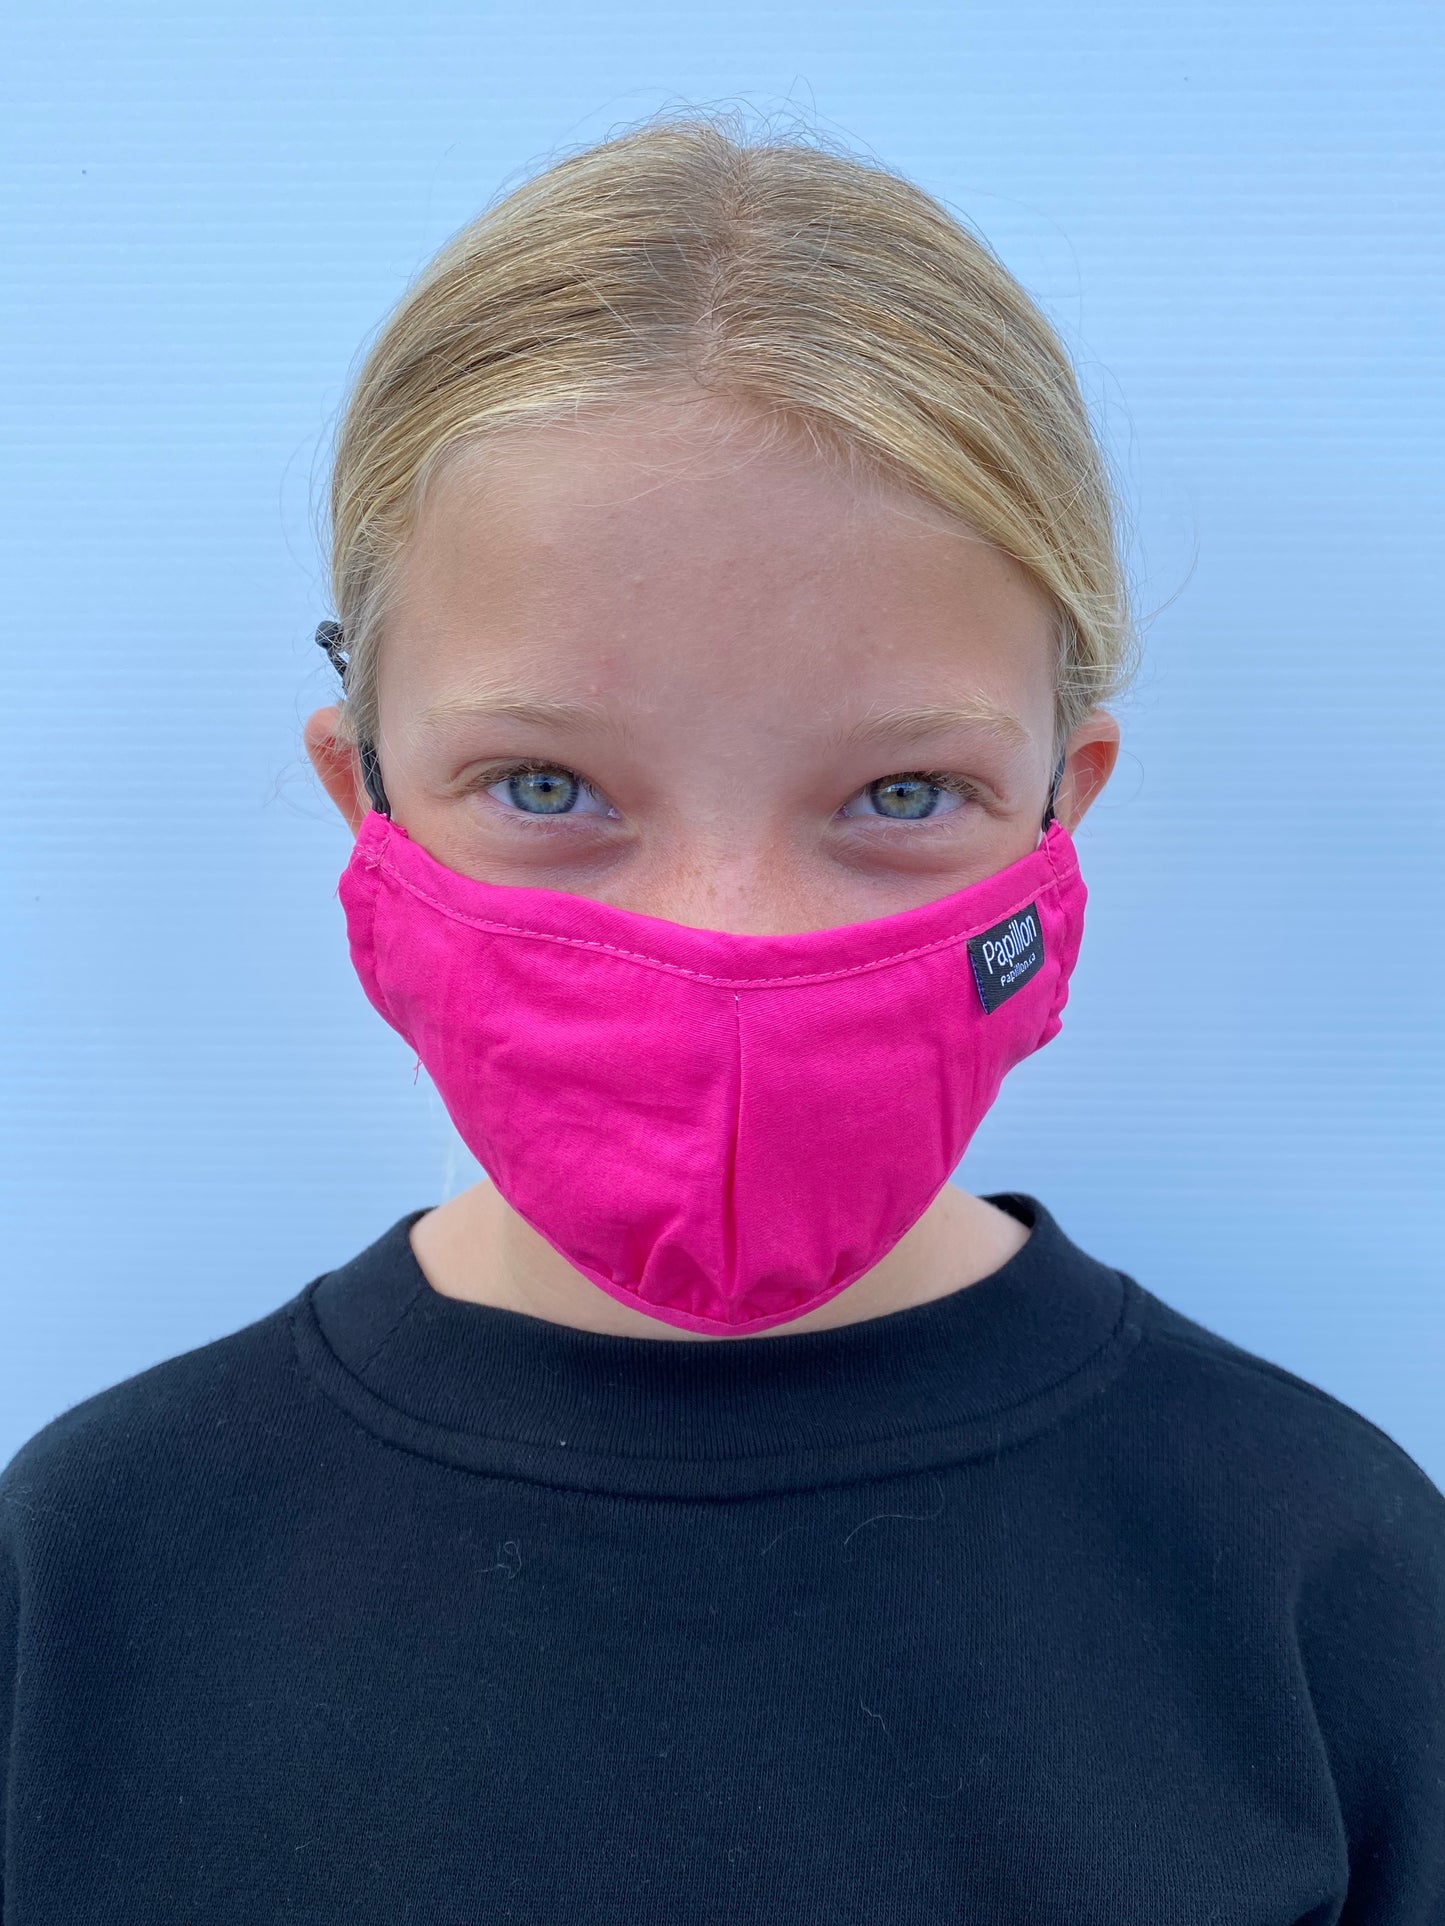 Youth Fushia Cotton Mask with Adjustable Ear Pieces